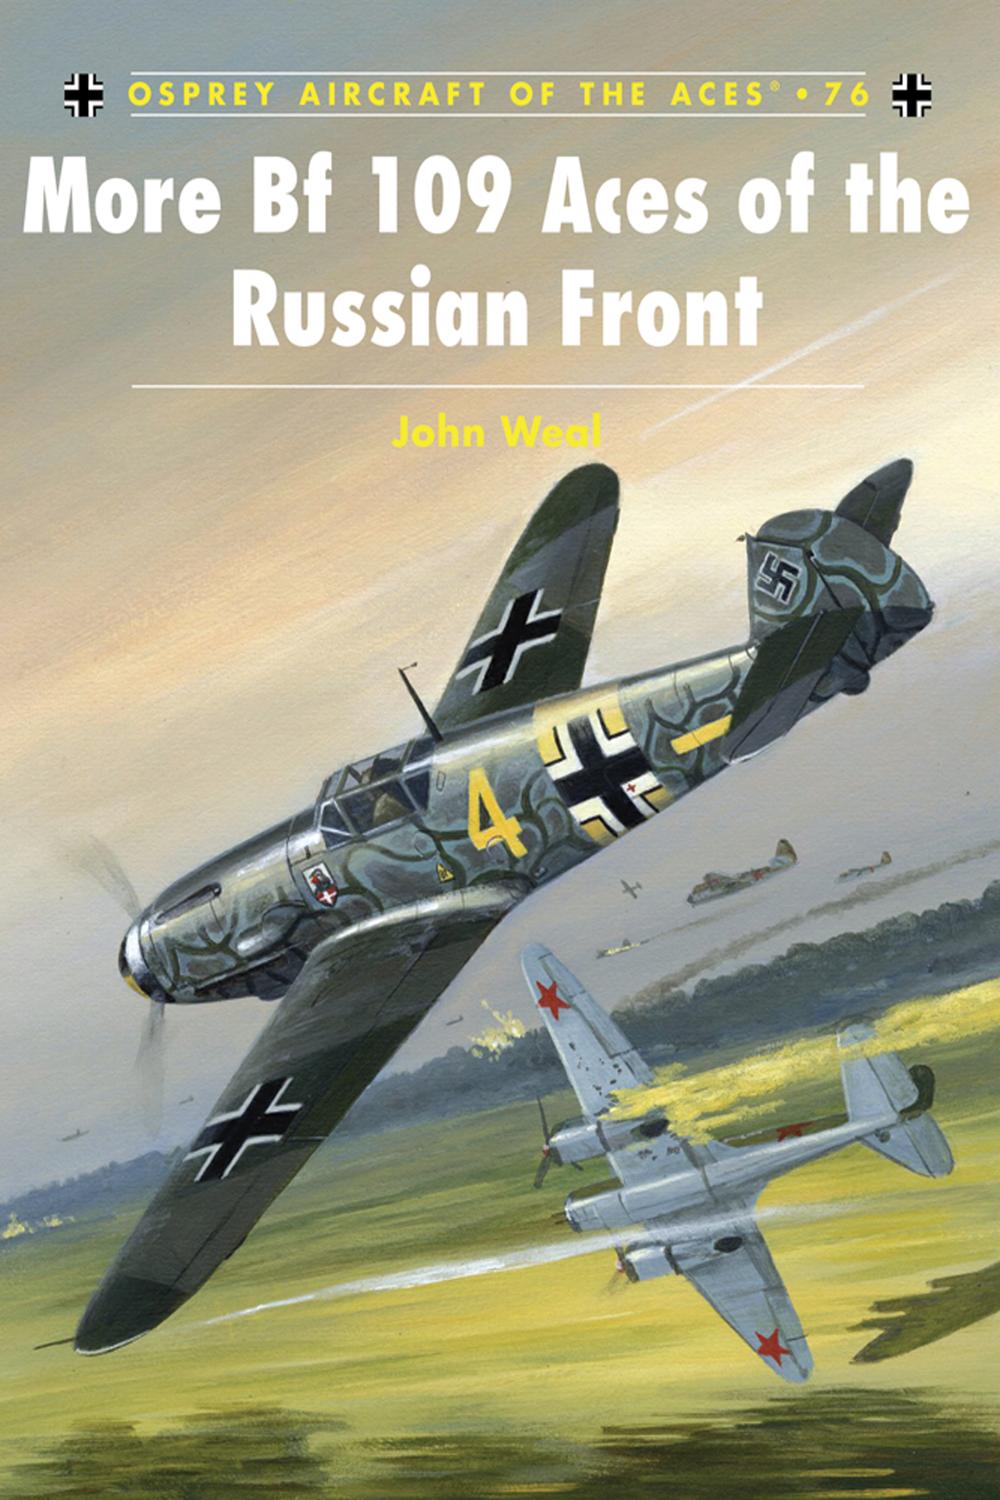 More Bf 109 Aces of the Russian Front - John Weal, John Weal,,